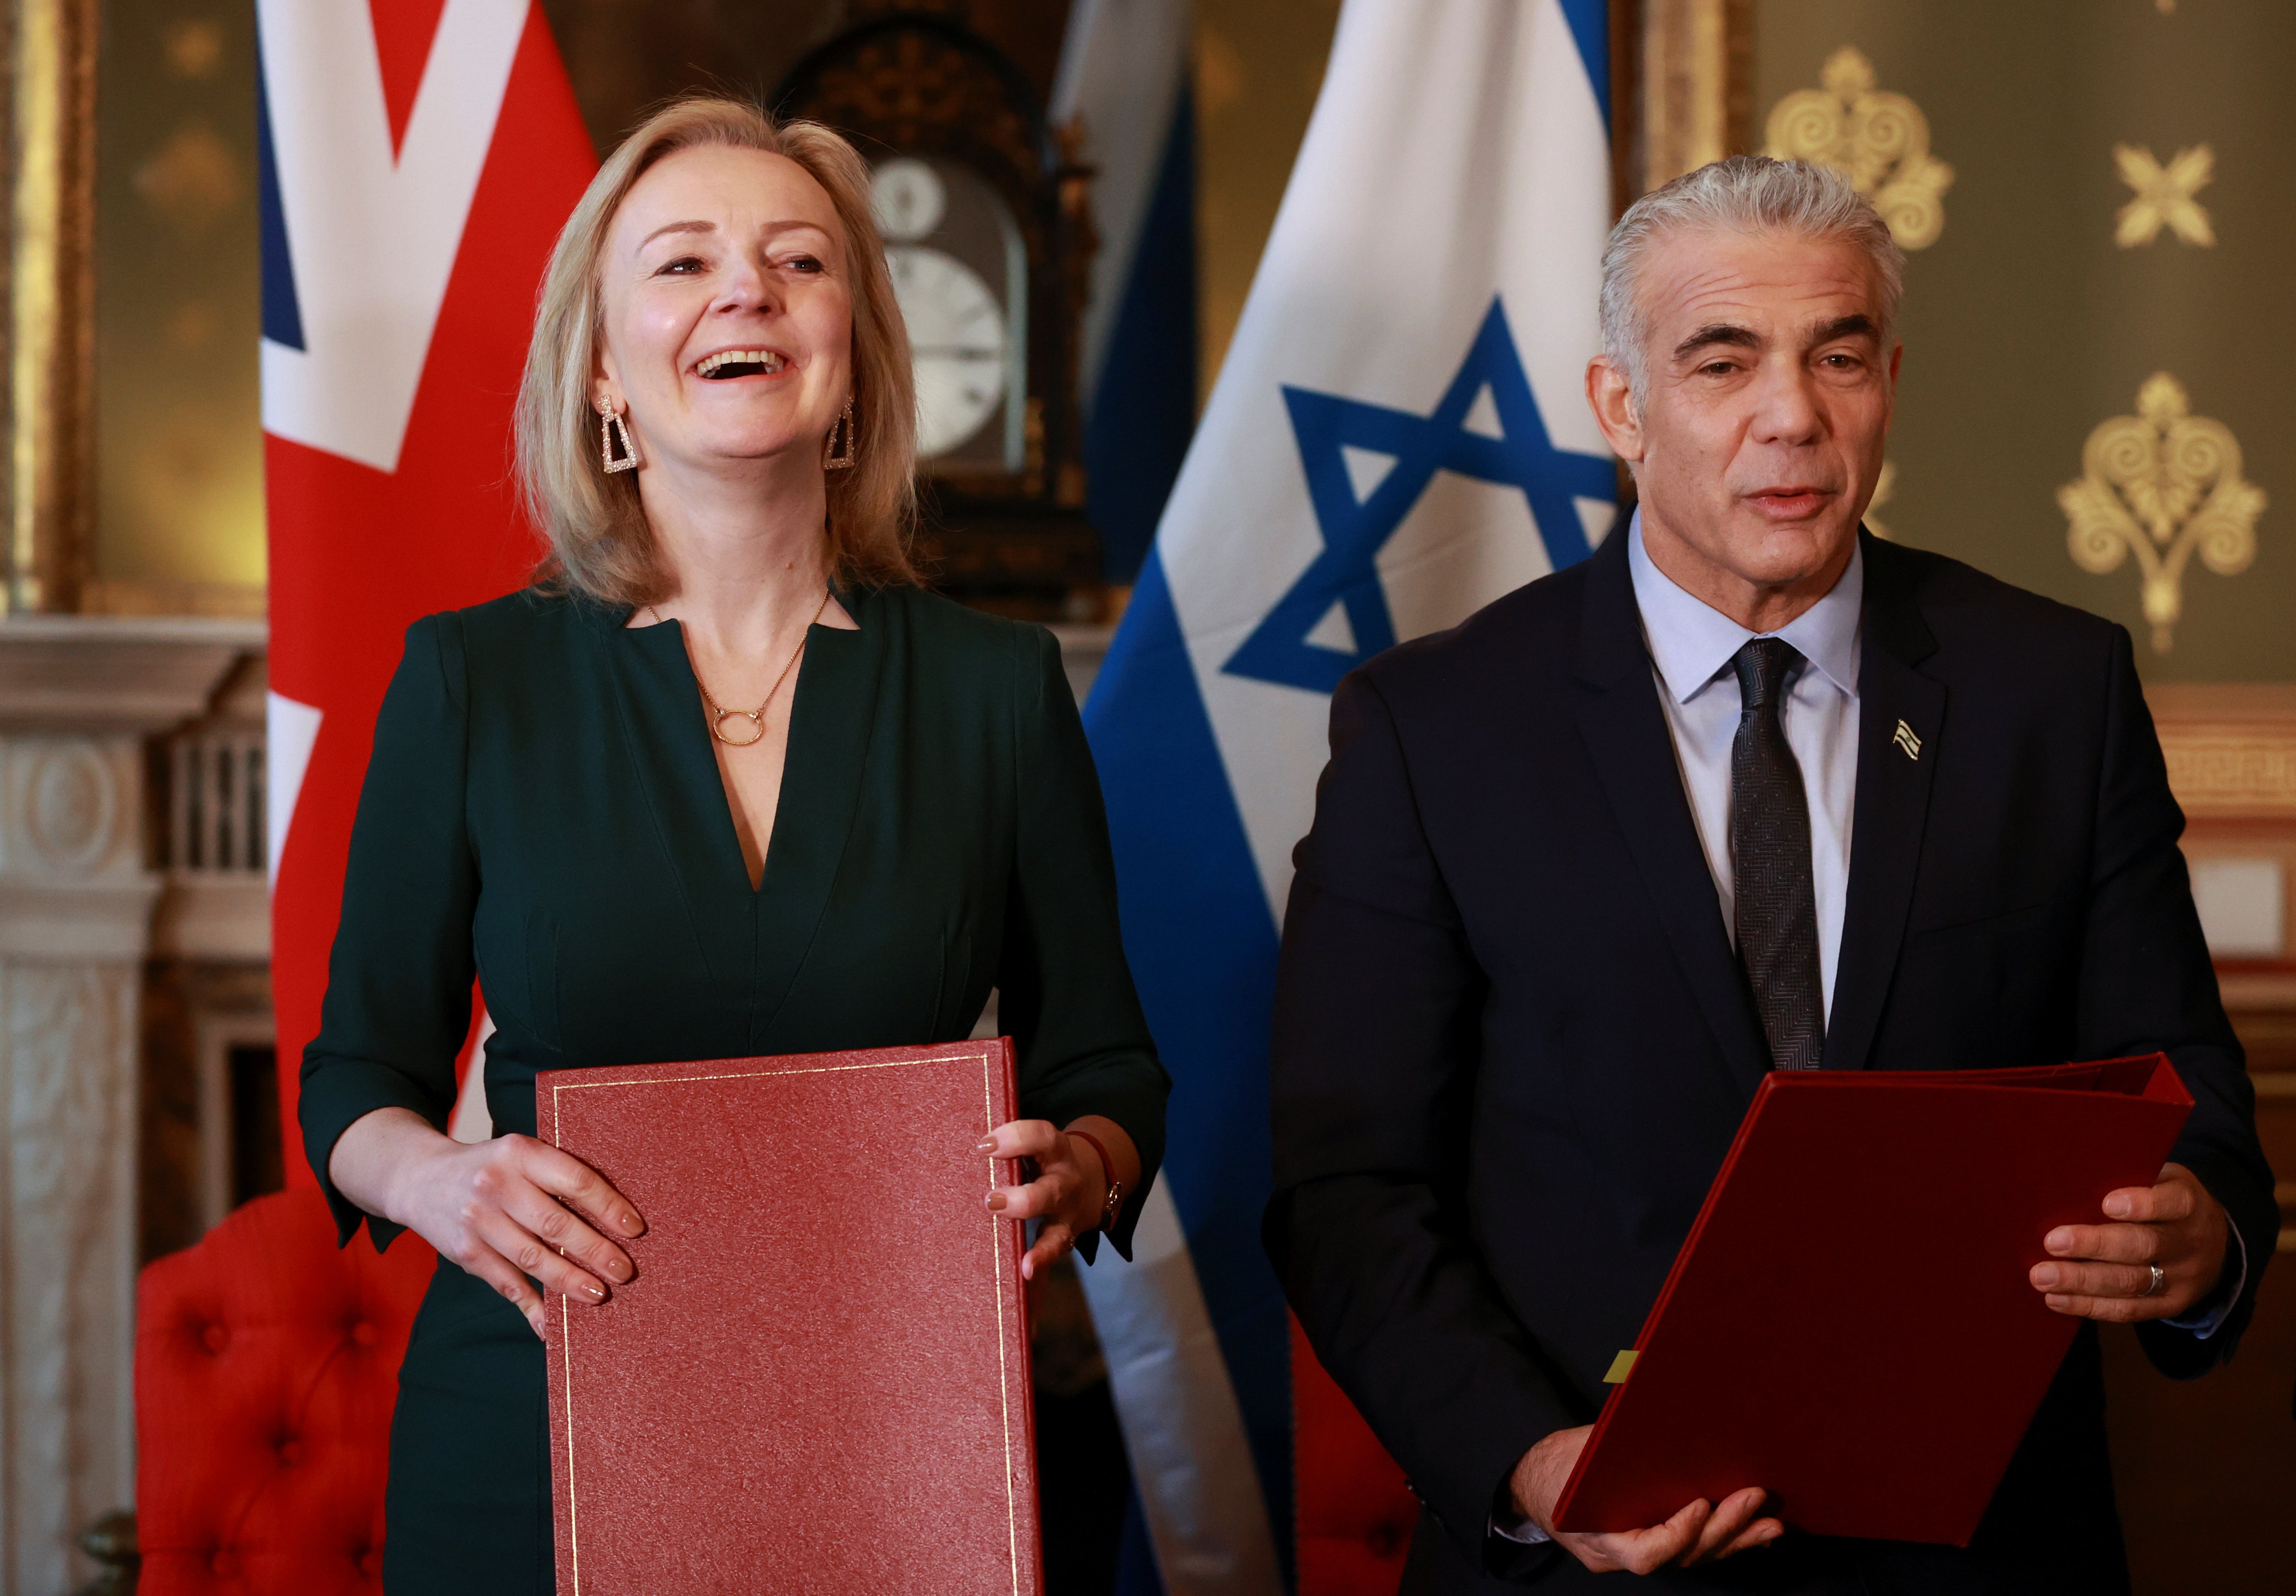 The foreign ministers of the UK and Israel have issued a fresh commitment to stop Iran from developing nuclear weapons